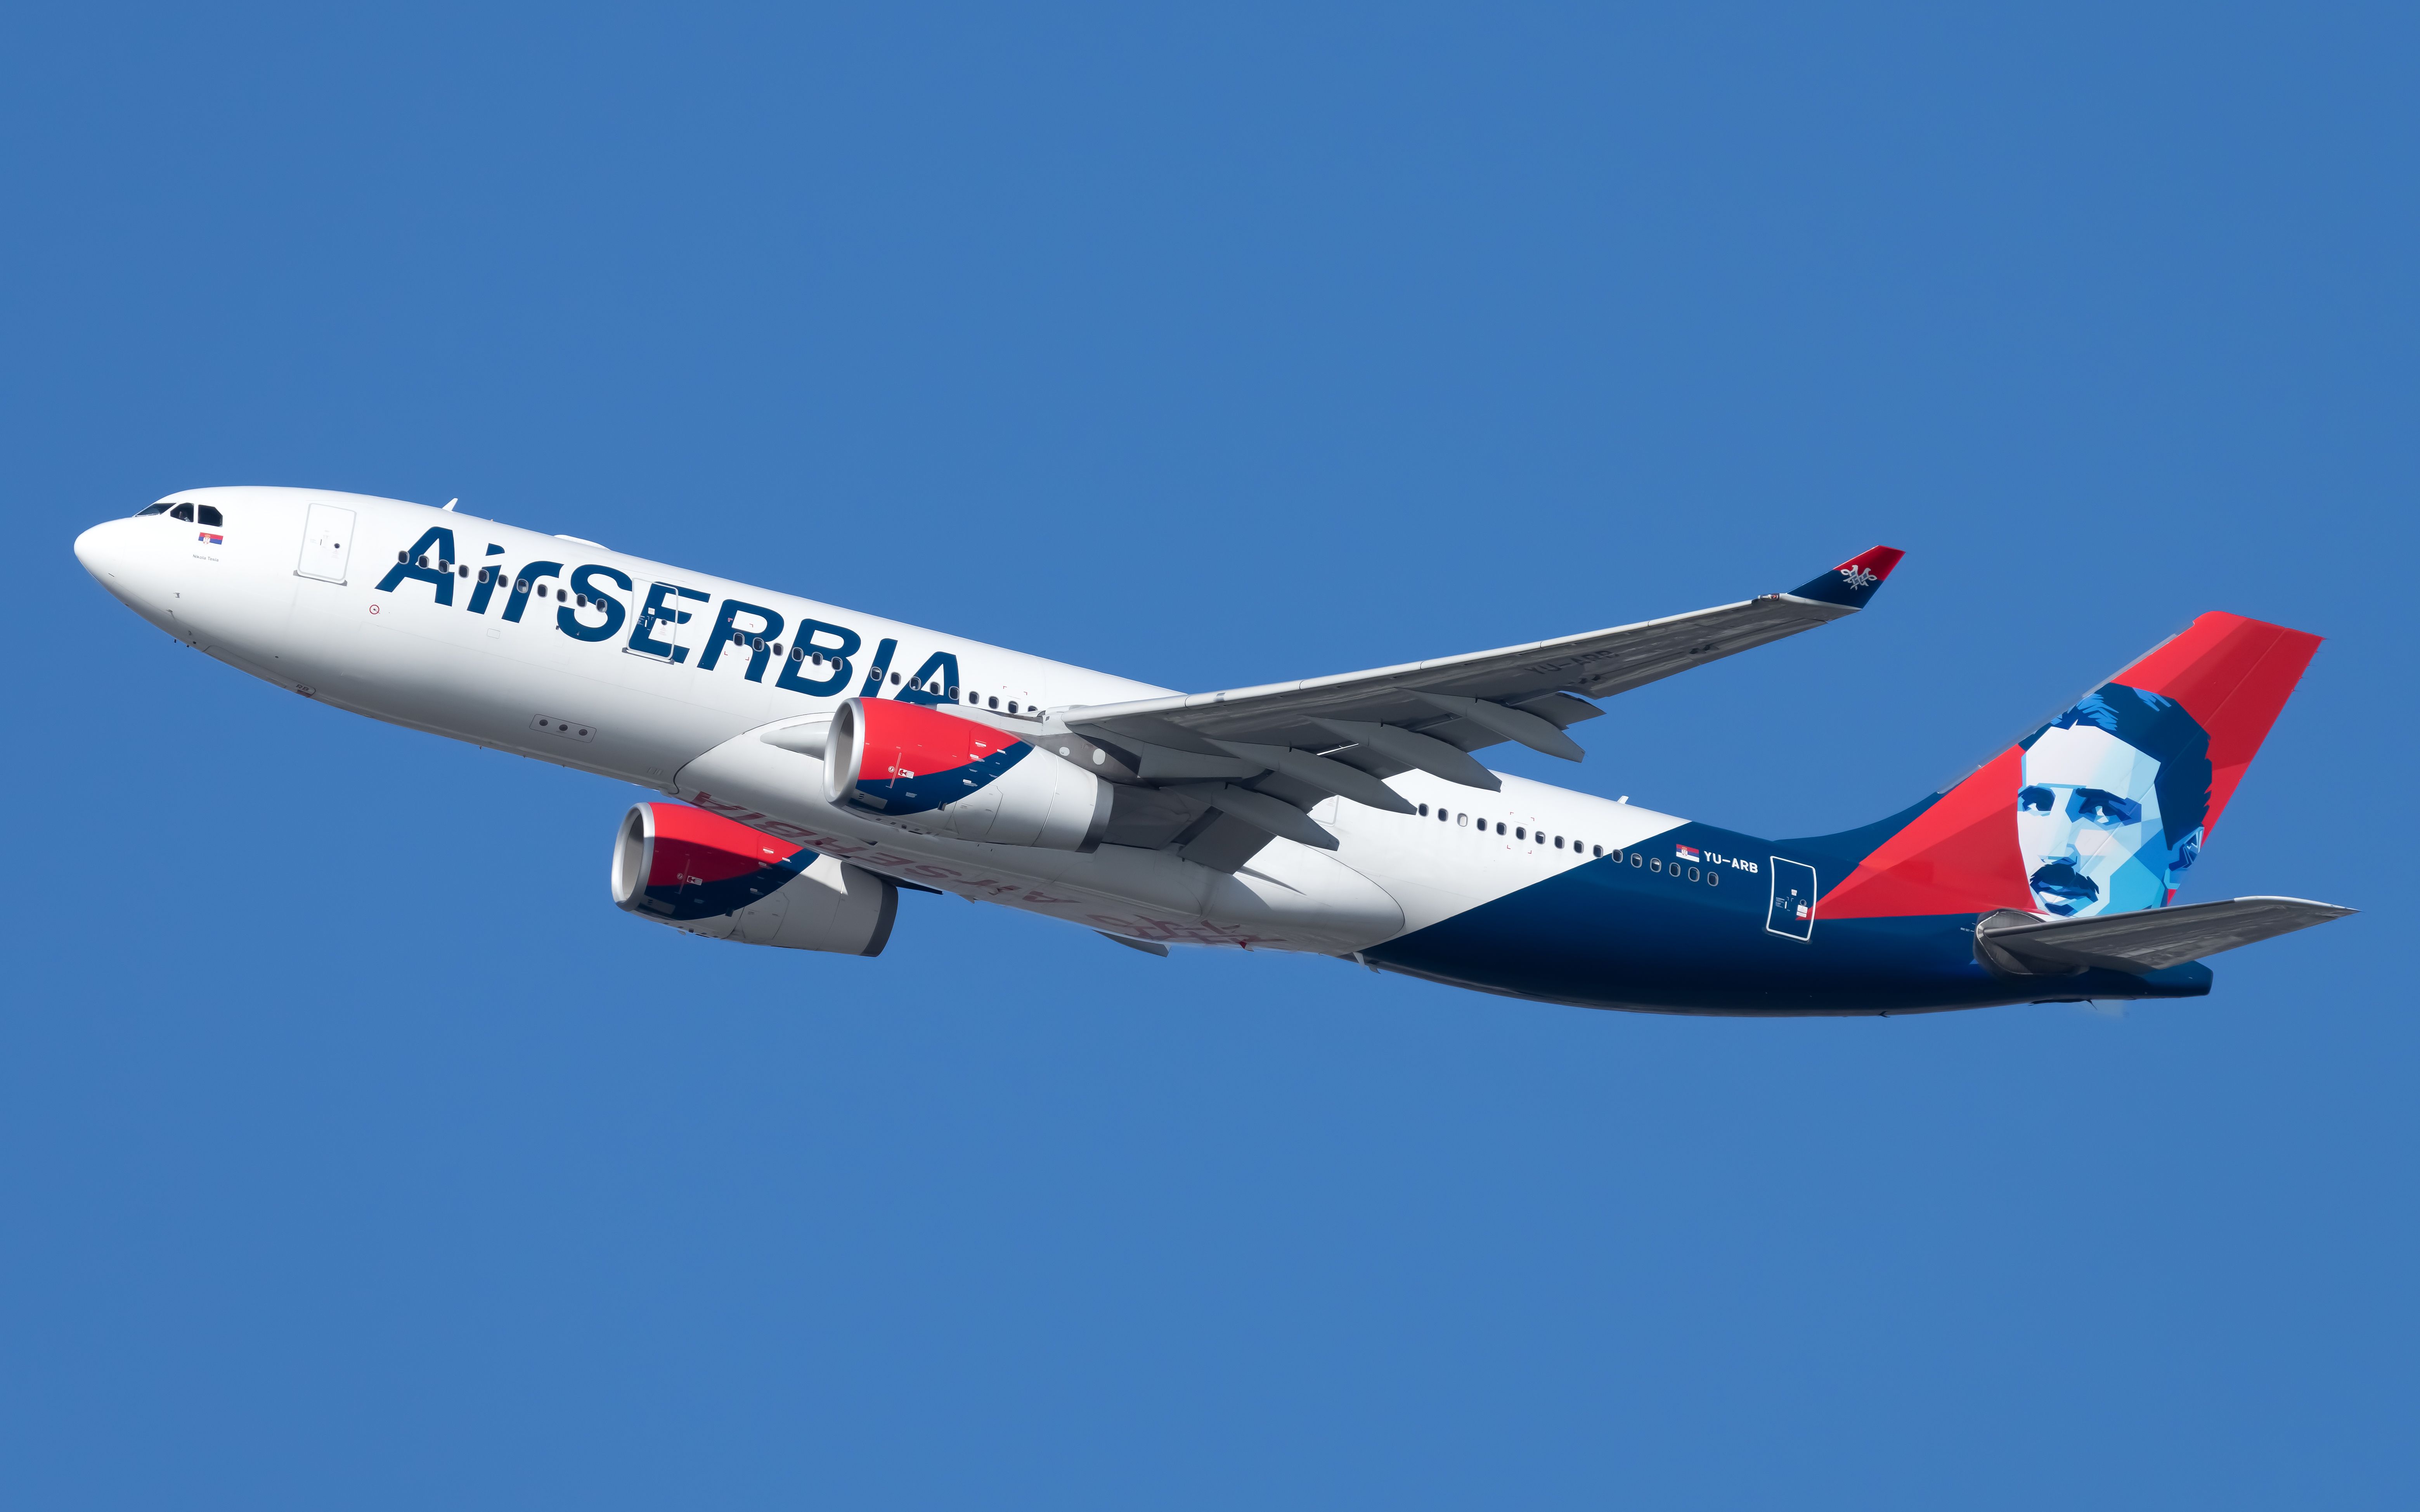 An Air Serbia Airbus A330-200 flying in the sky.